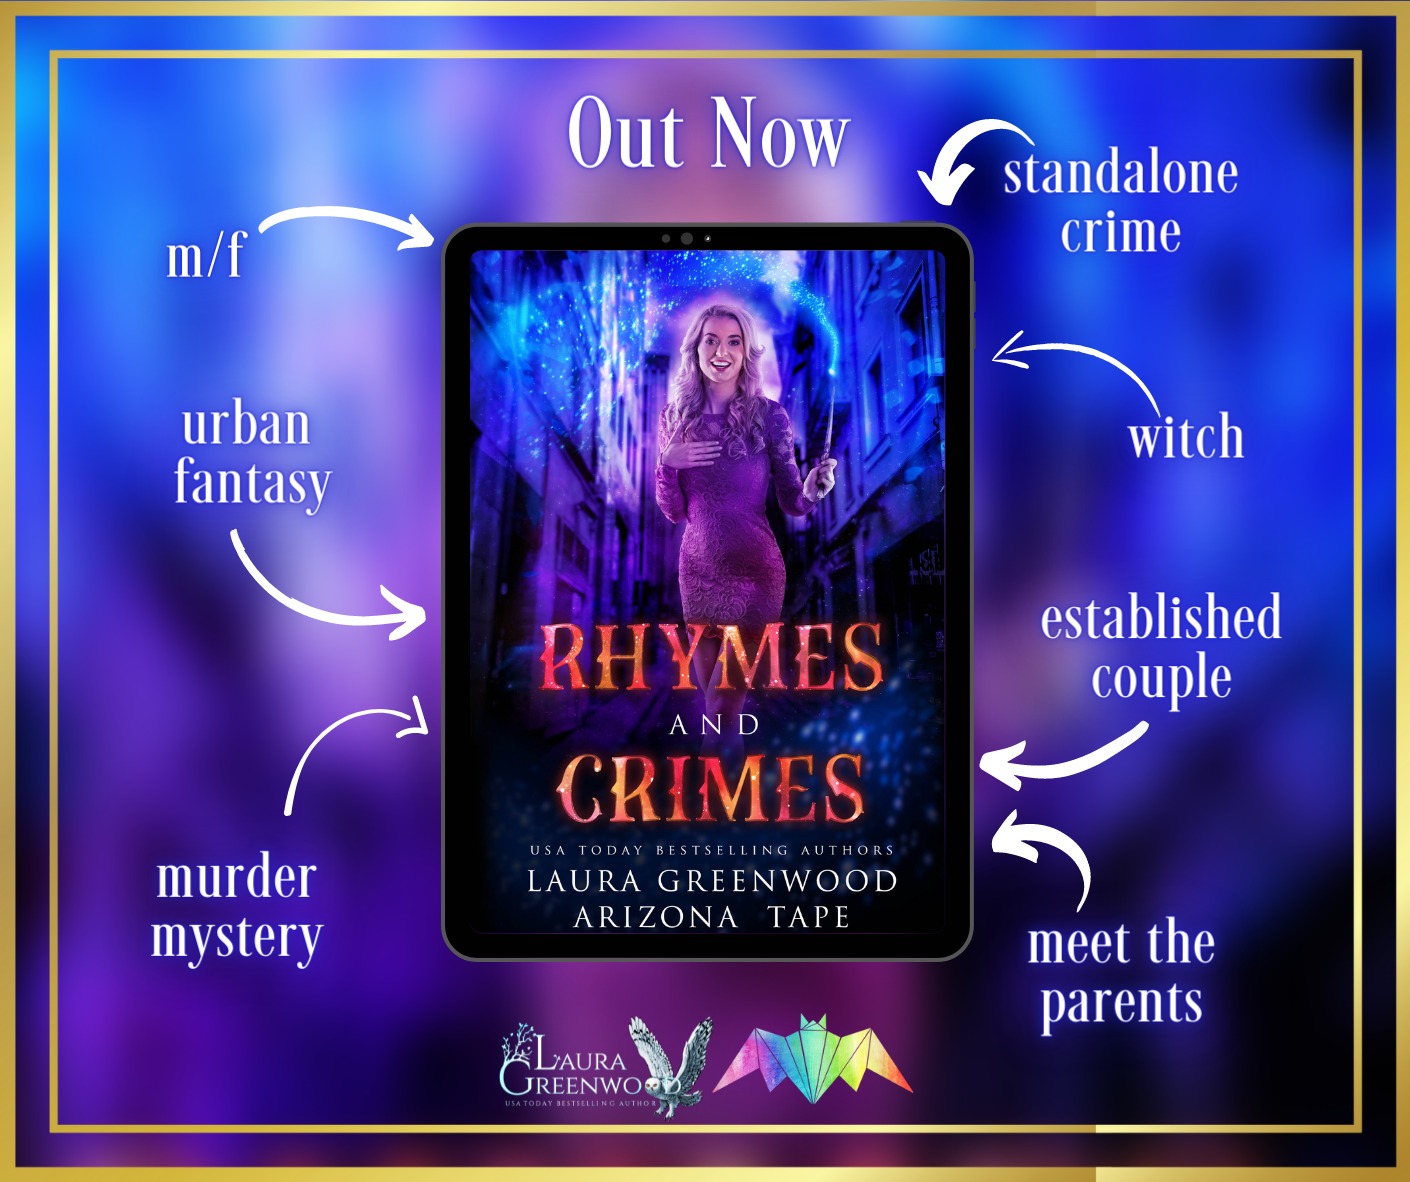 Out Now: Rhymes And Crimes  (Amethyst’s Wand Shop Mysteries #8)